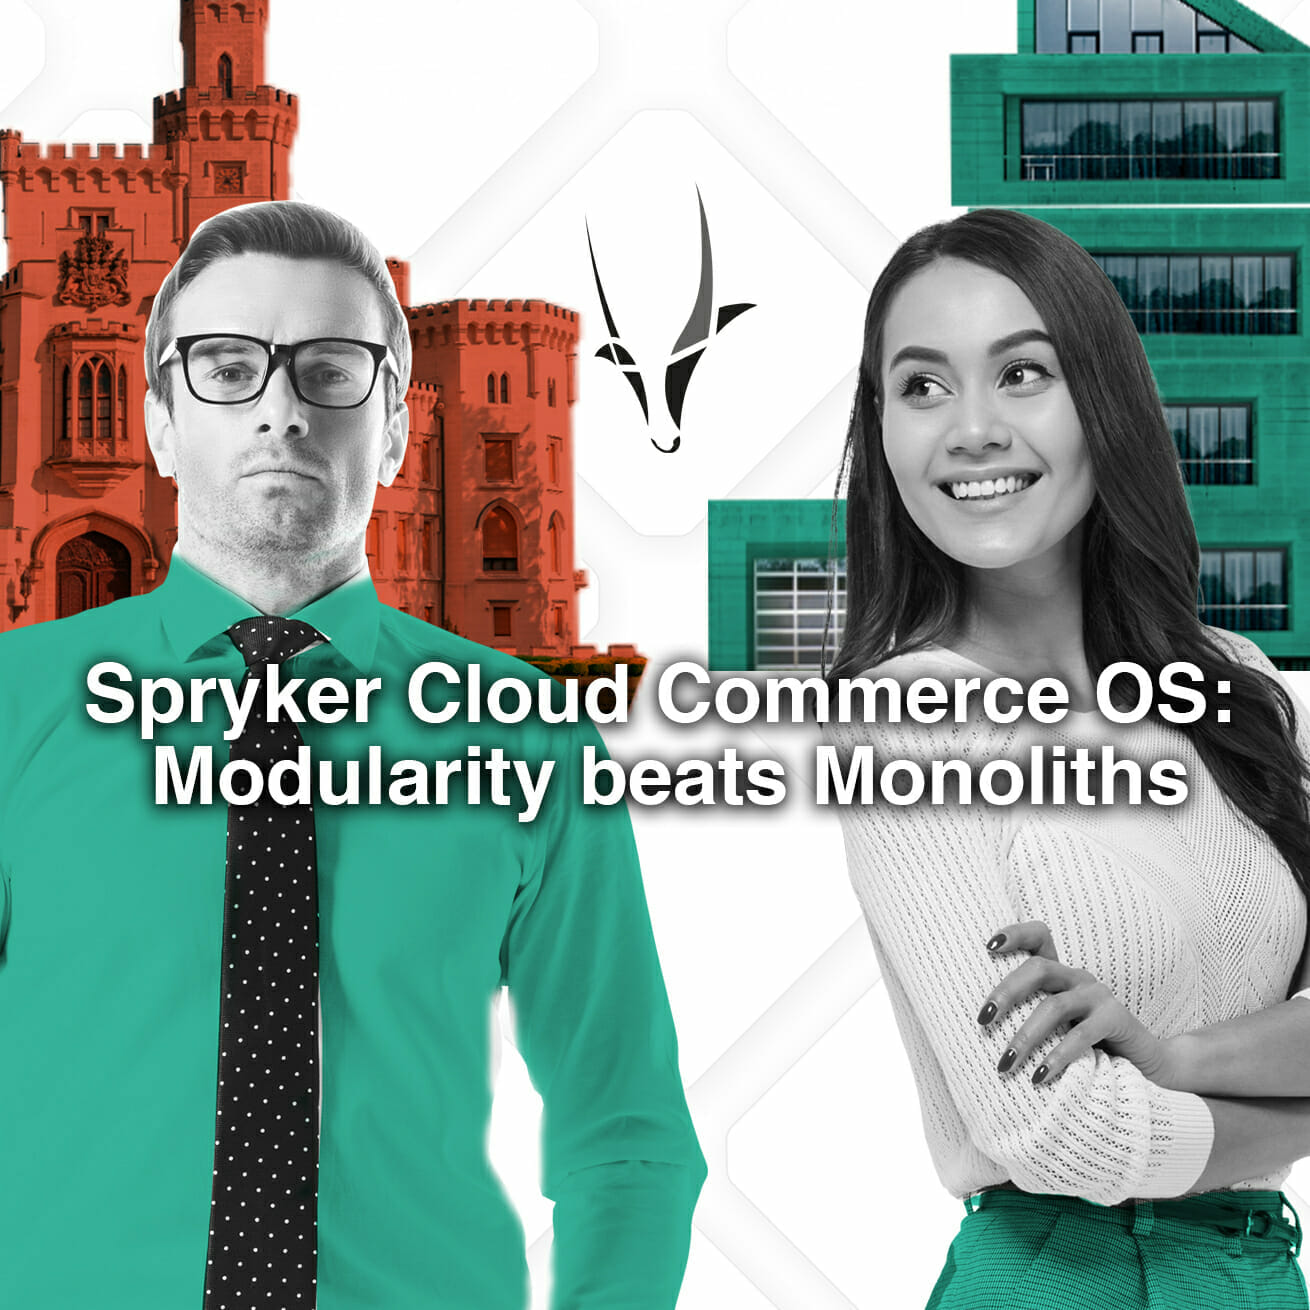 A man in glasses and a woman smiling stand in front of images of a red castle and a teal modern building. The title reads: "Spryker Cloud Commerce OS: Modularity beats Monoliths." A stylized antelope head logo is displayed at the center top.